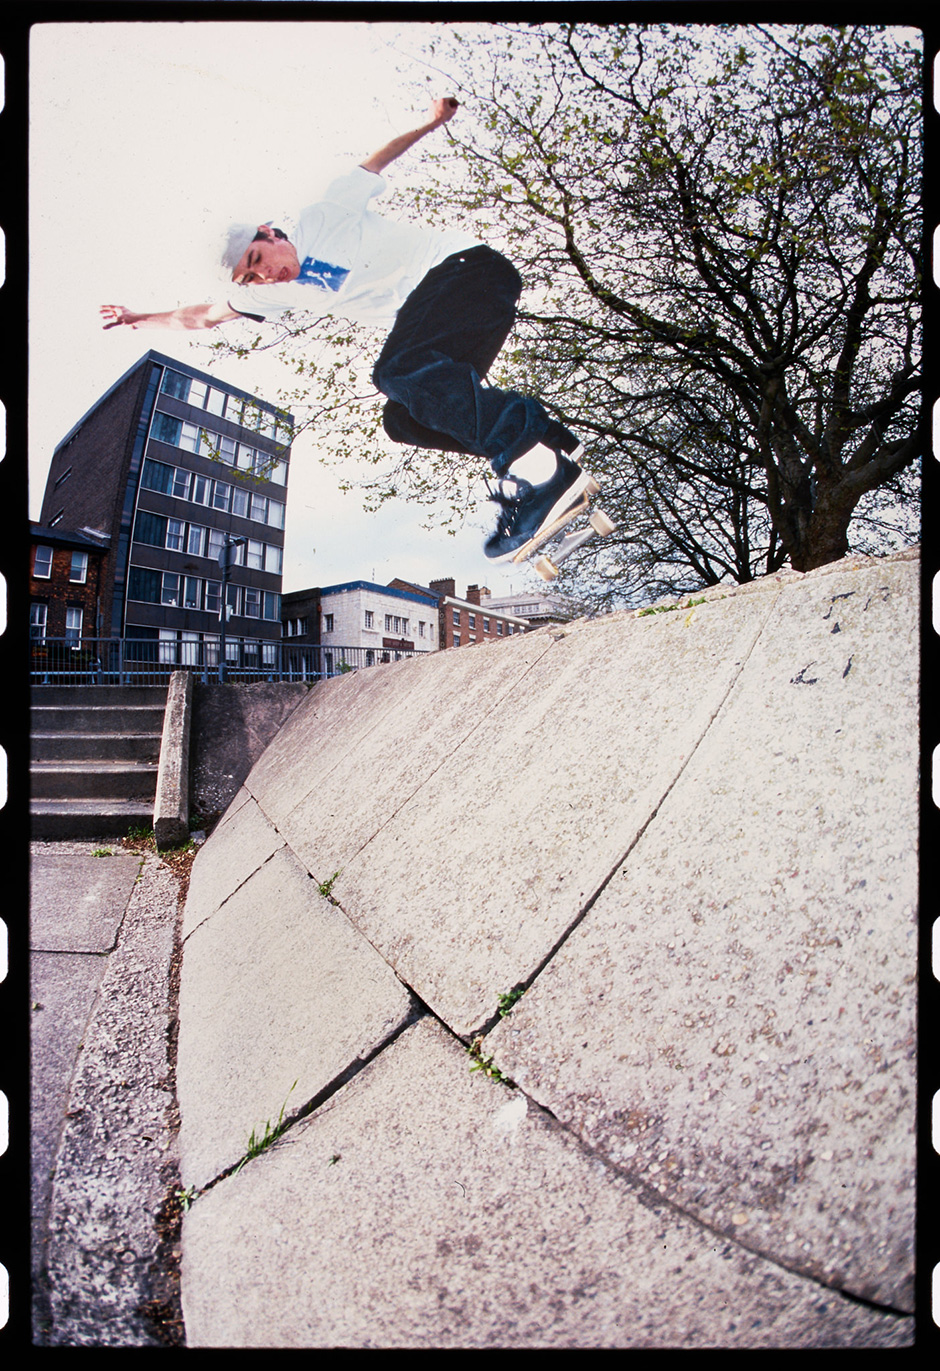 Olly Todd does a backside noseblunt for Wig which would end up in his Haunts for Sidewalk